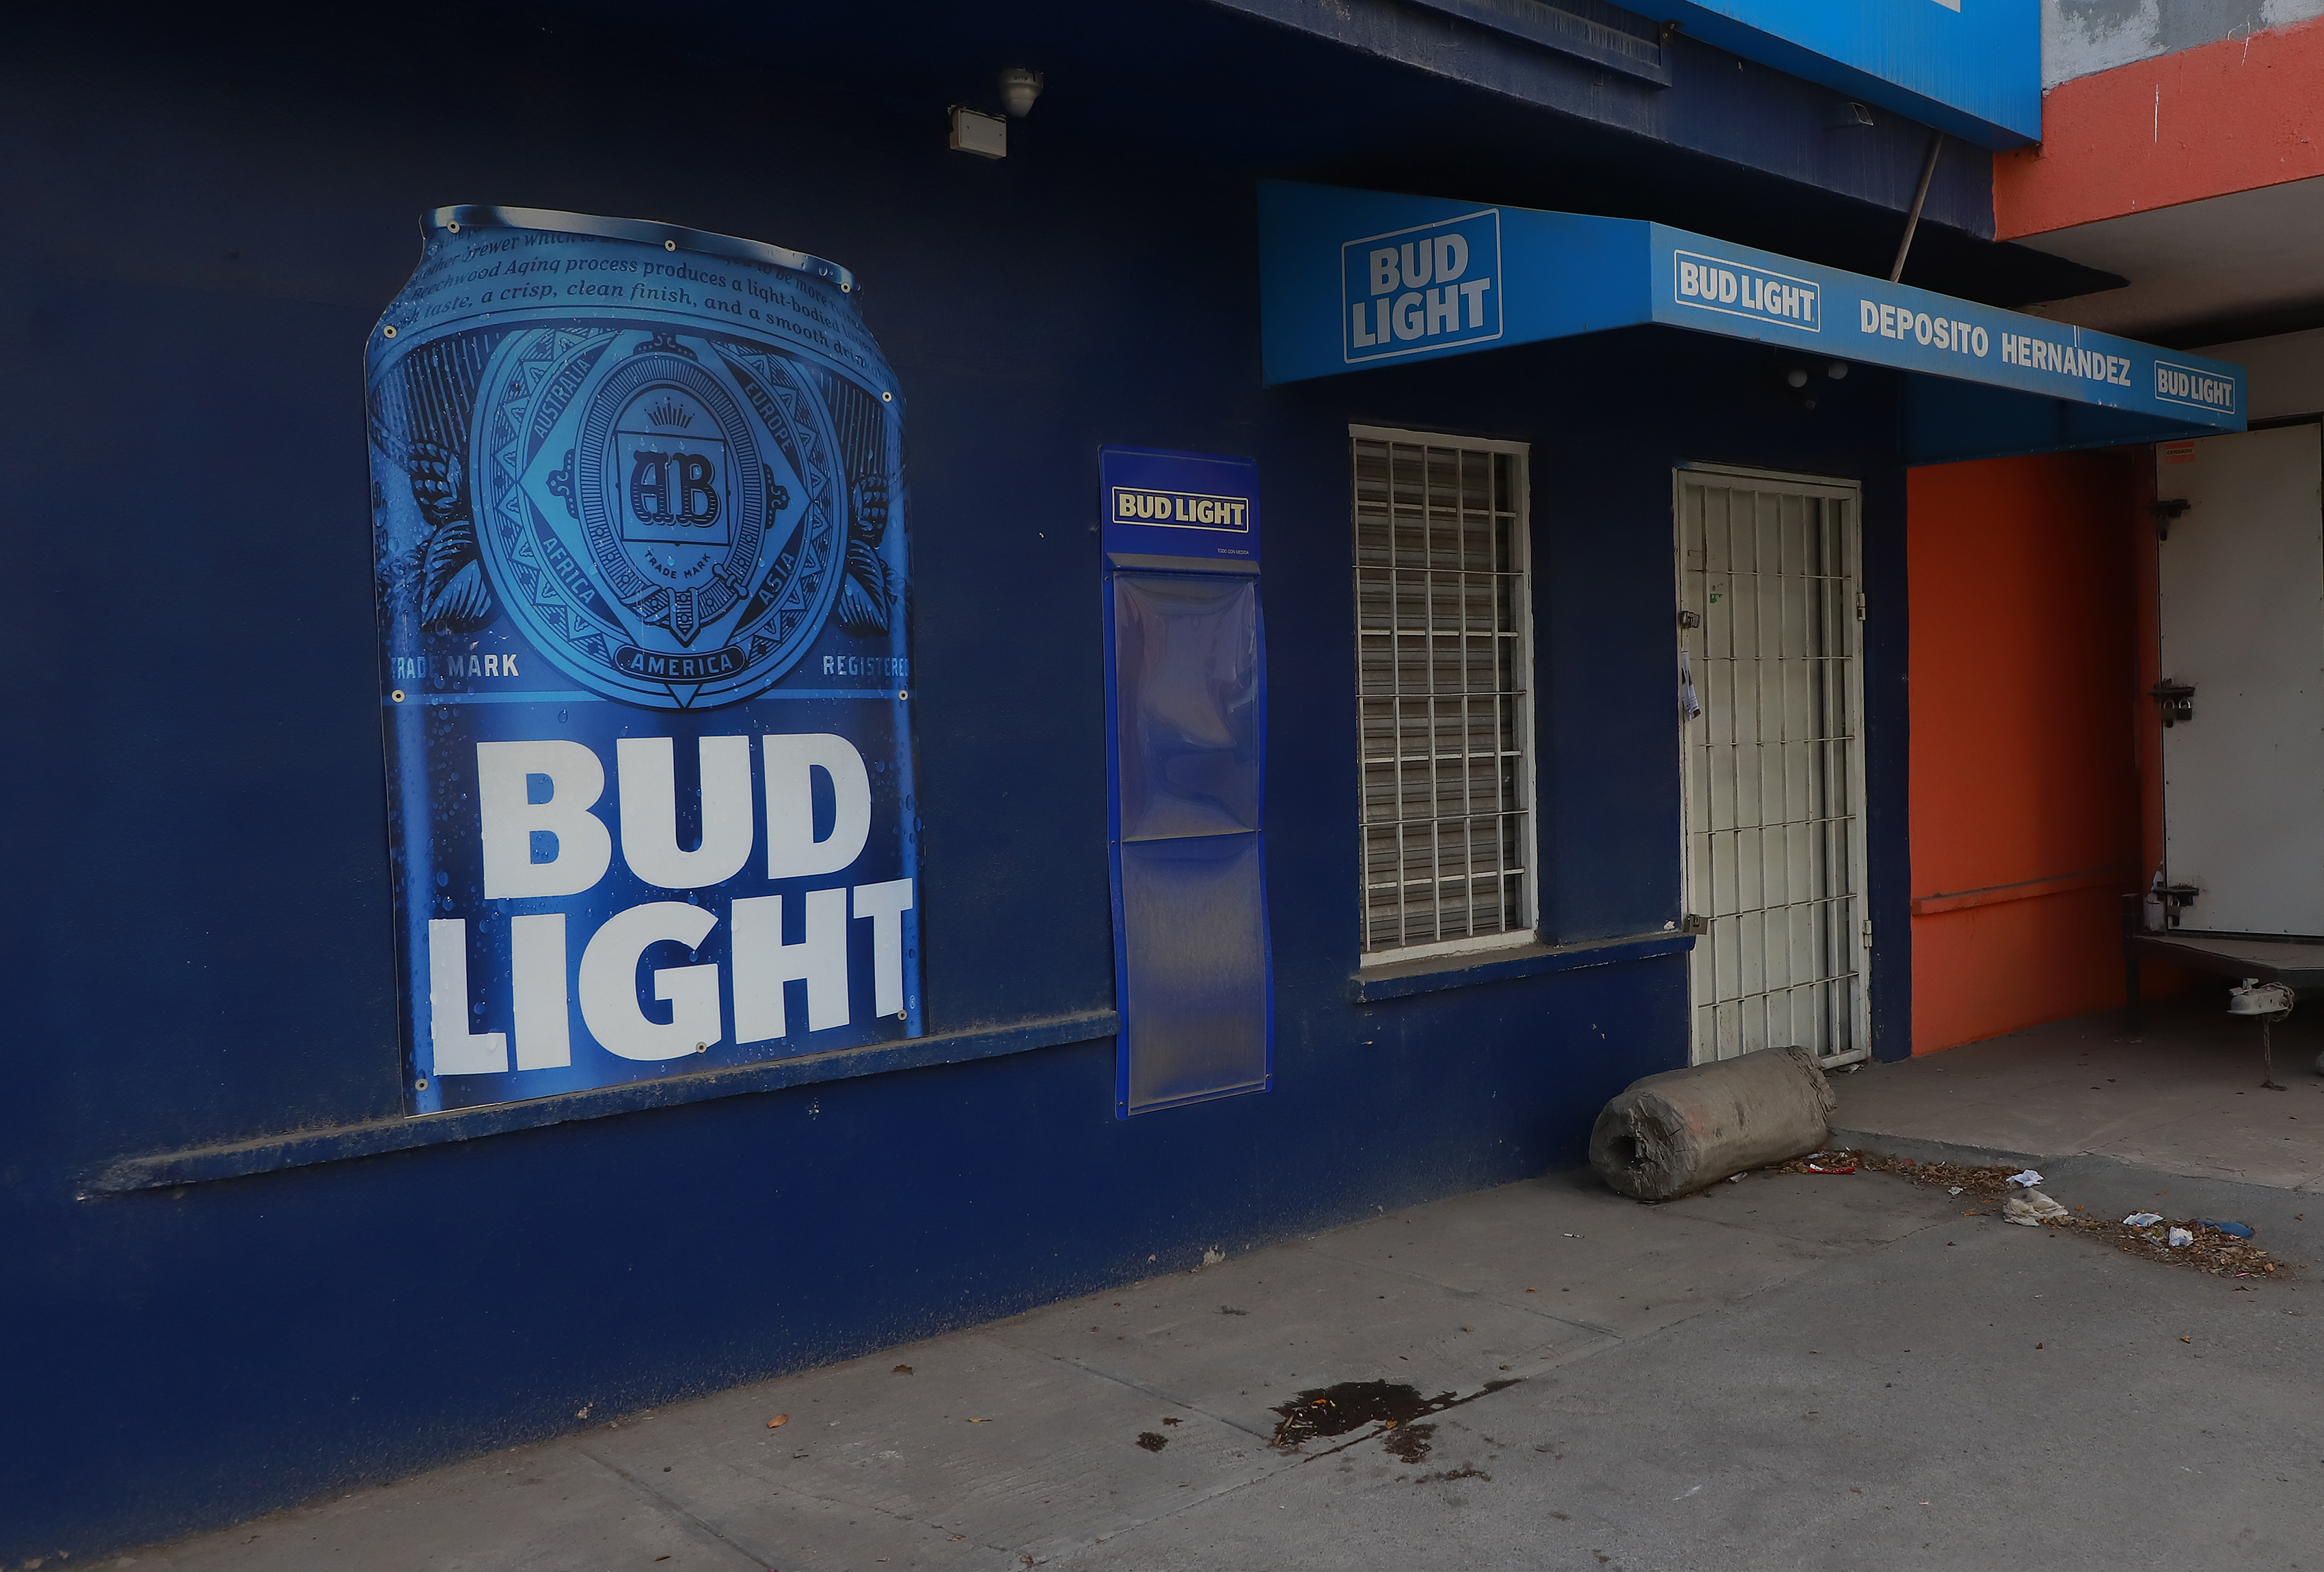 image-of-bud-light-stack-at-walmart-goes-viral-just-take-them-ciao-ly